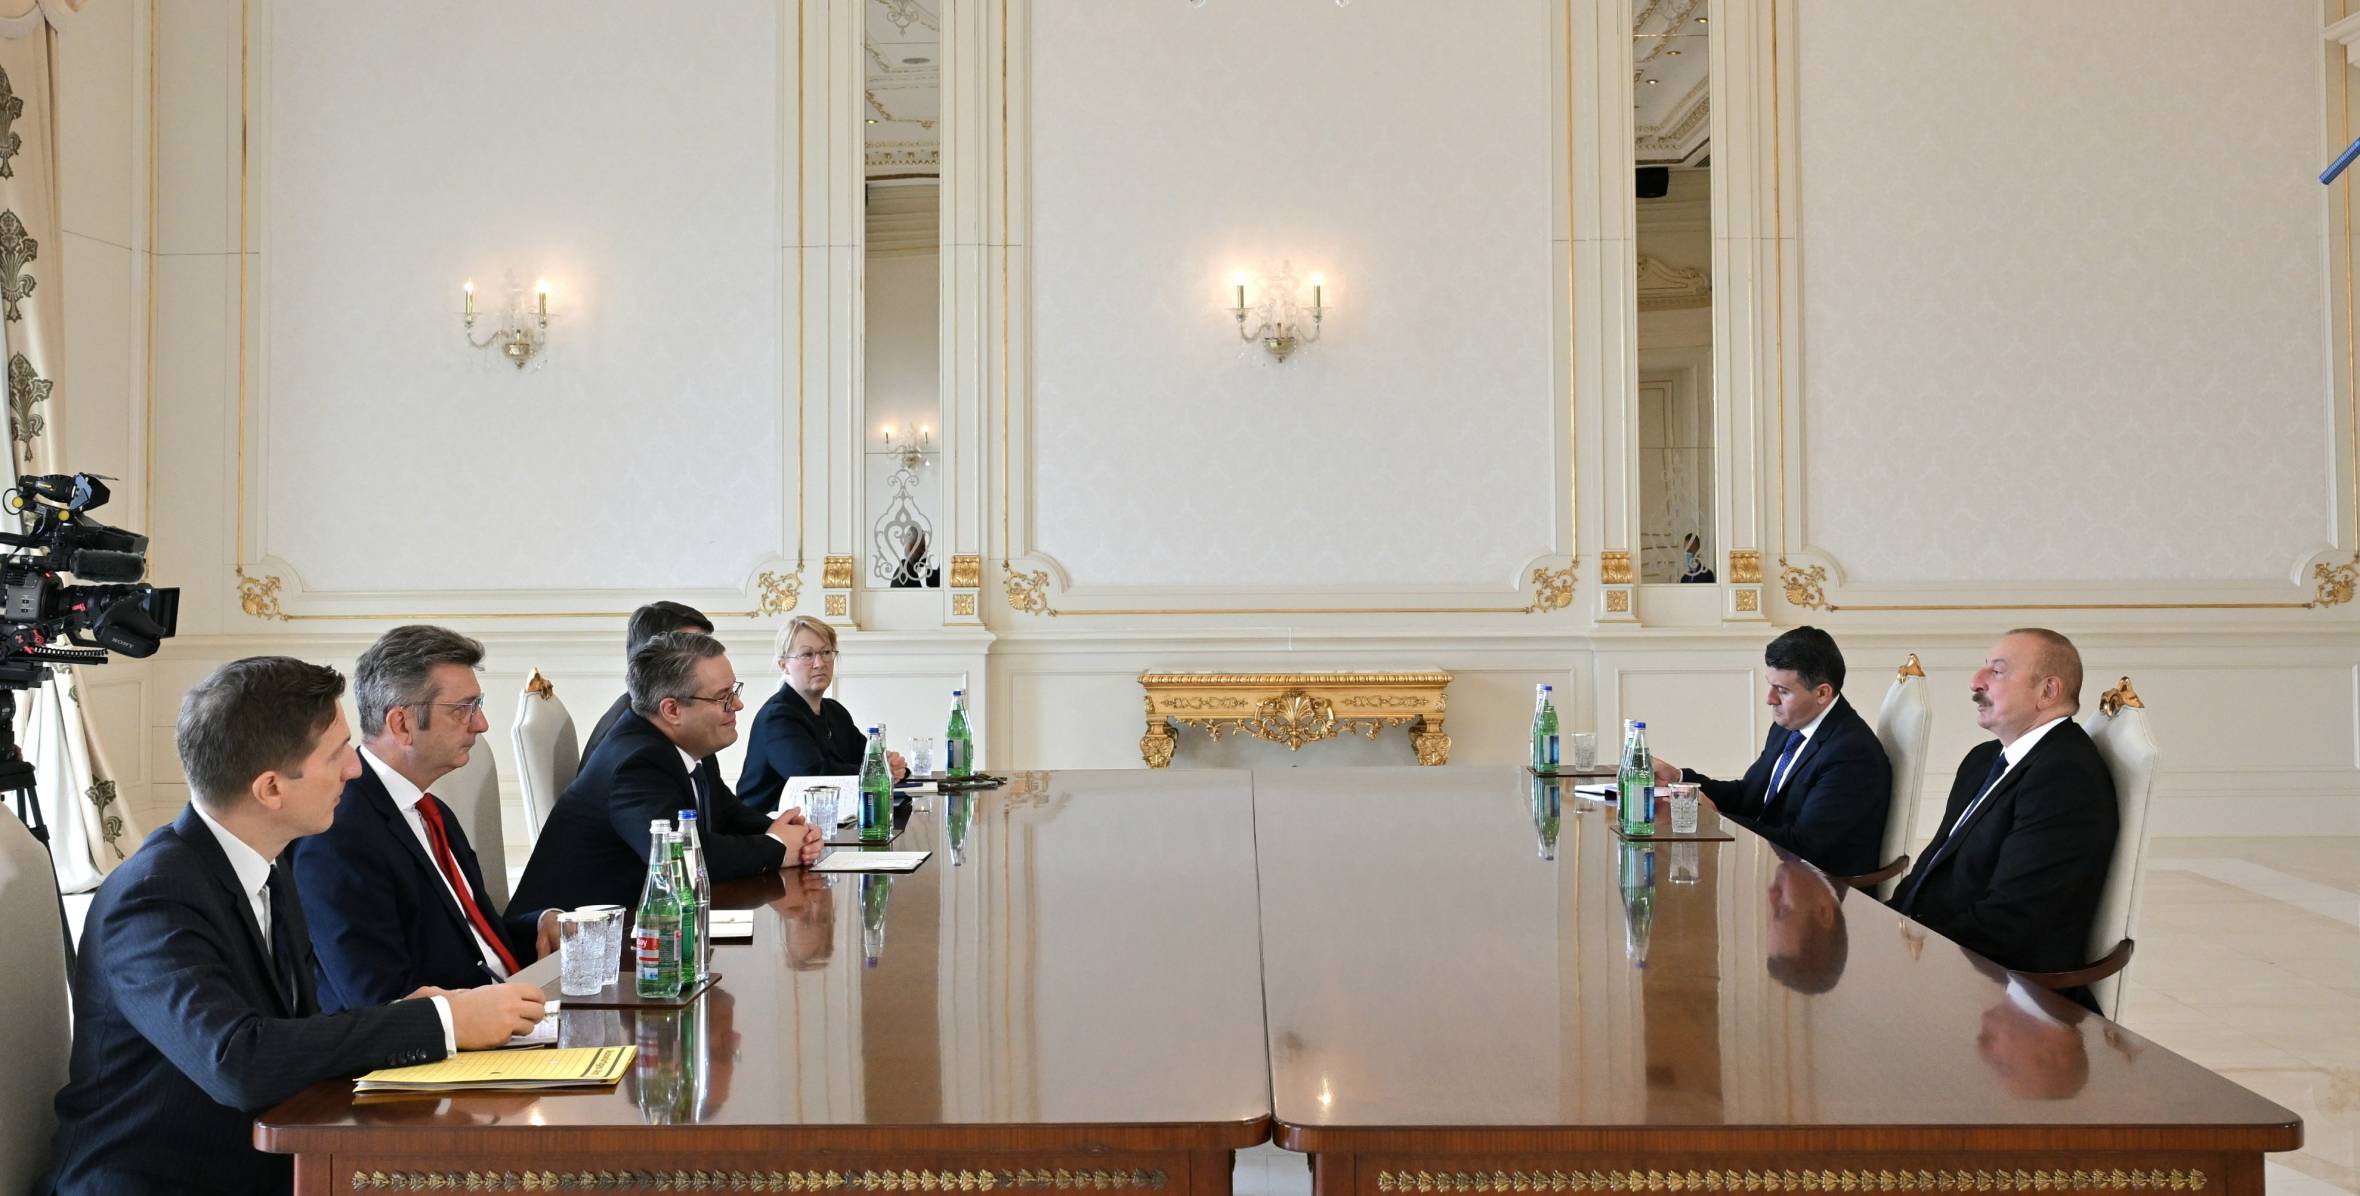 Ilham Aliyev received Minister of State at Federal Foreign Office of Germany